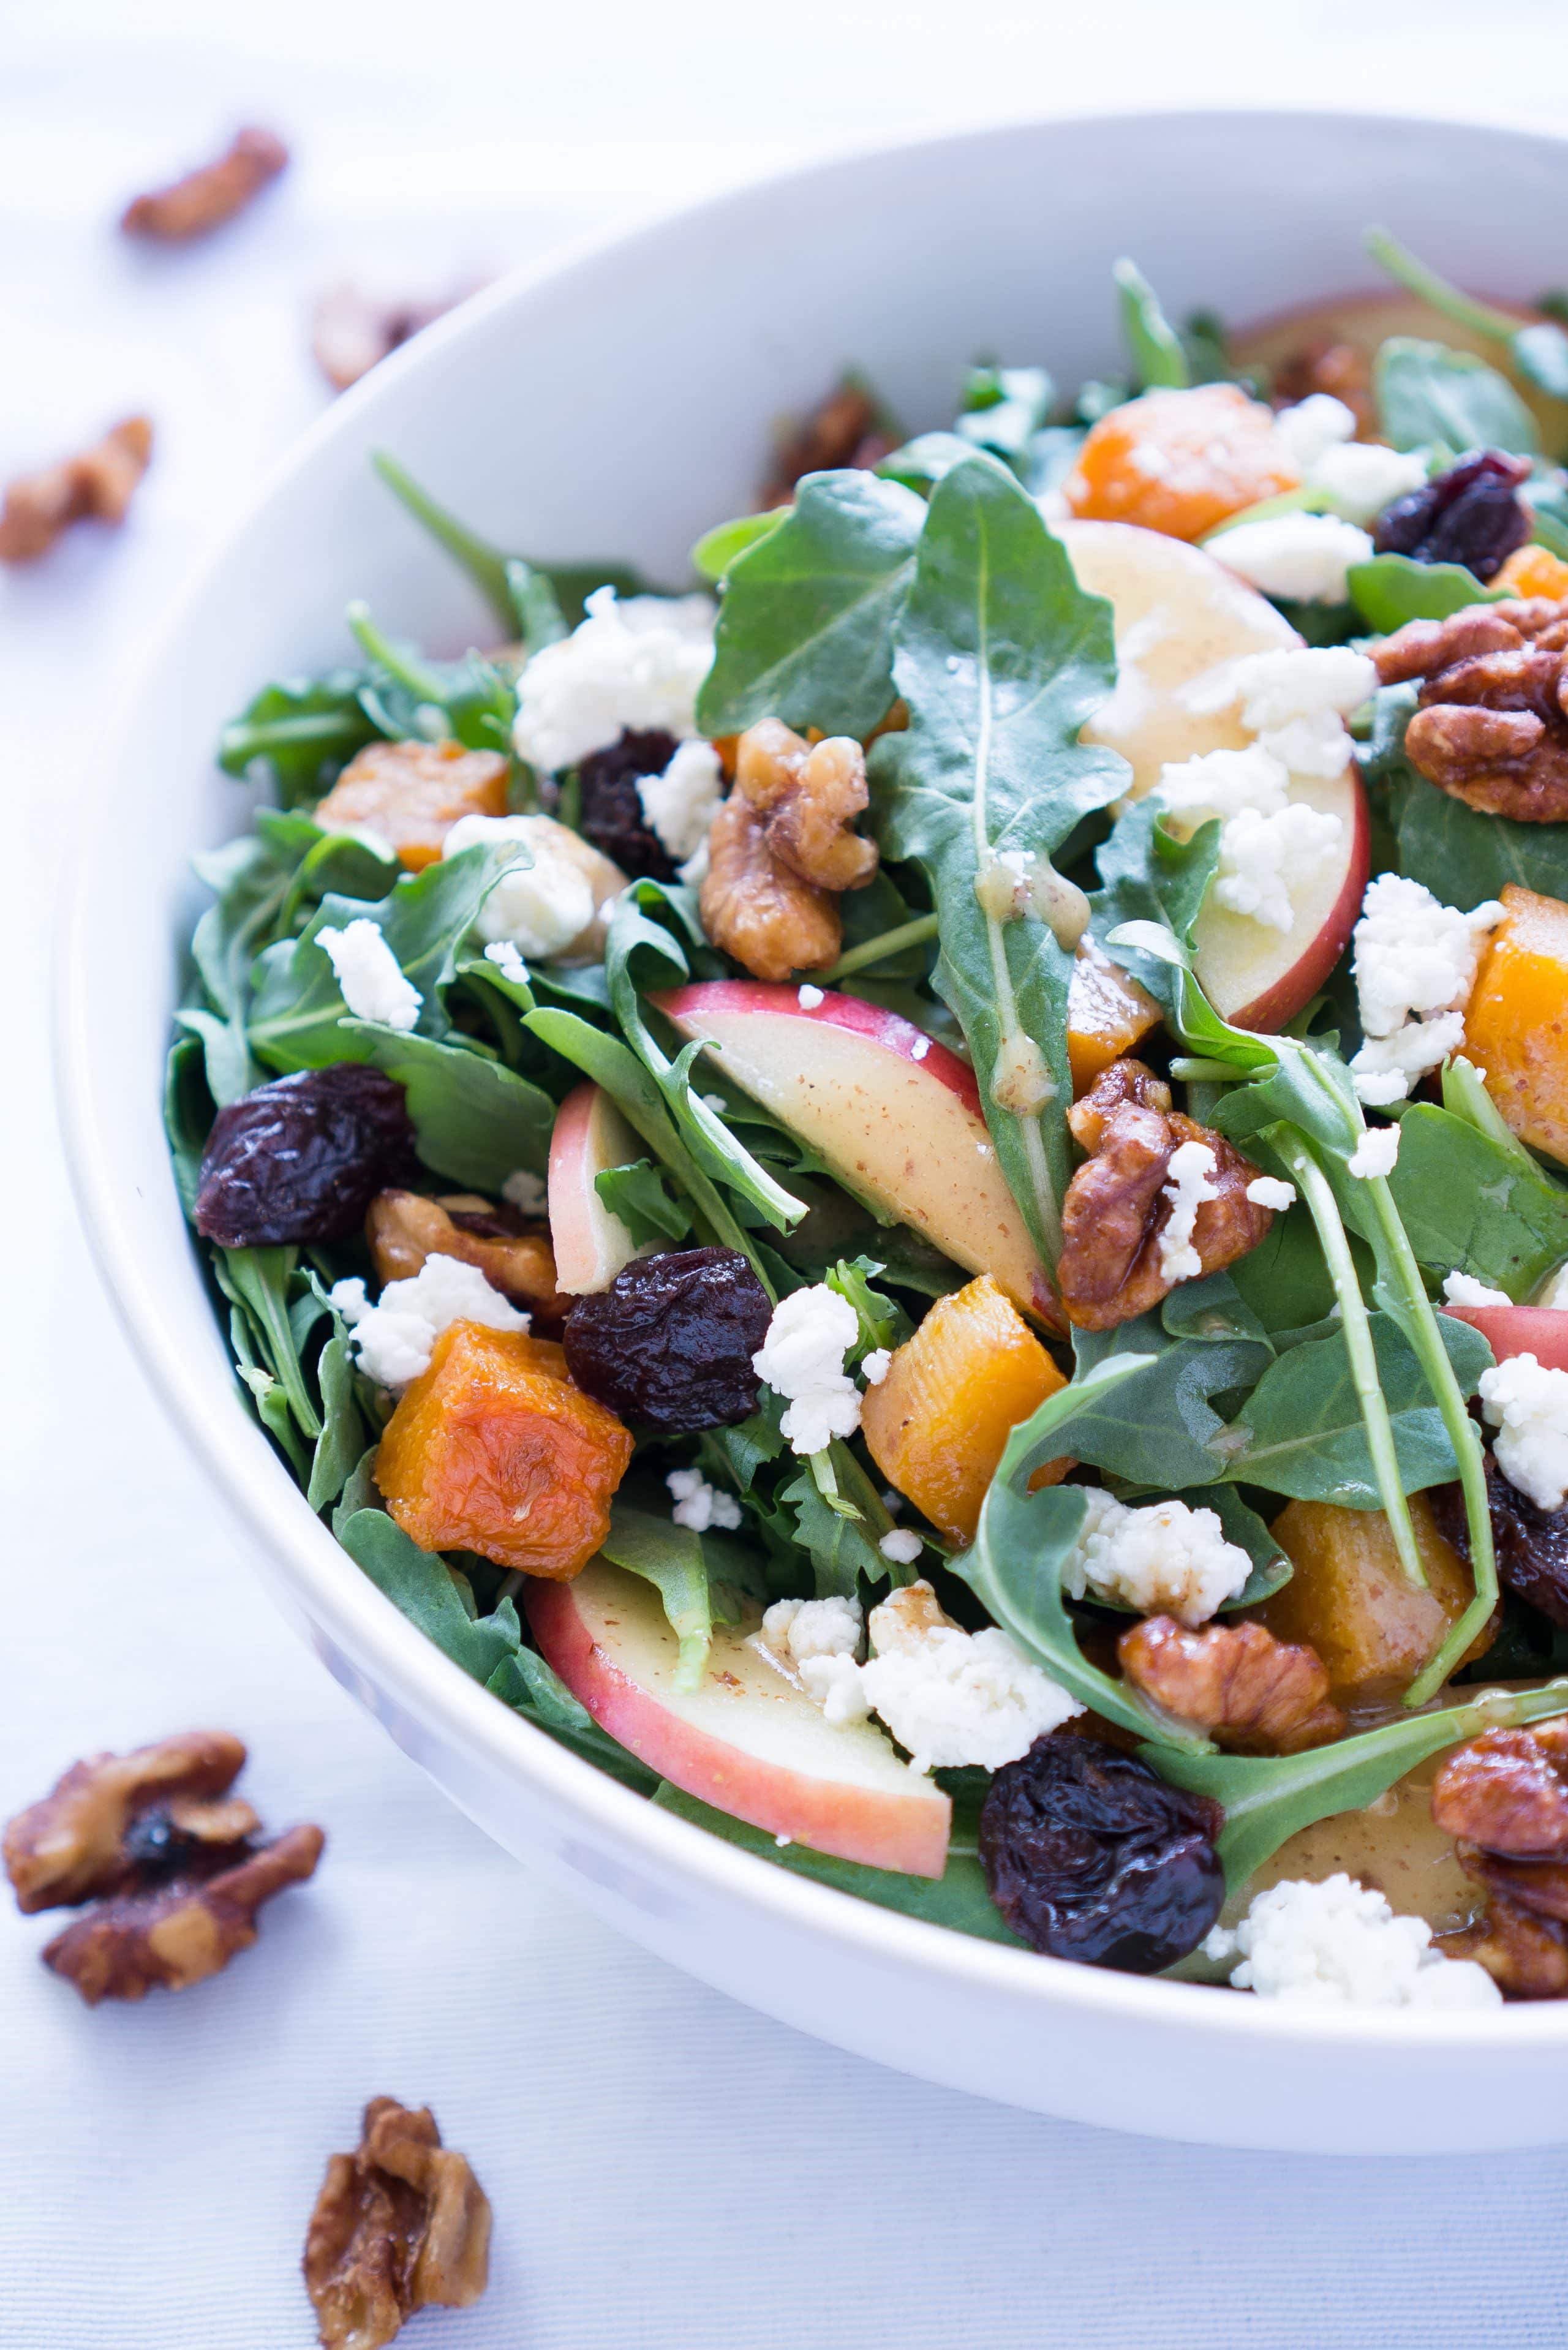 Roasted Butternut Squash Salad - Healthy recipe for Roasted Butternut Squash Salad with arugula! Paired with fresh apple, dried tart cherries, goat cheese, candied walnuts, & a homemade maple vinaigrette ♥ | freeyourfork.com 